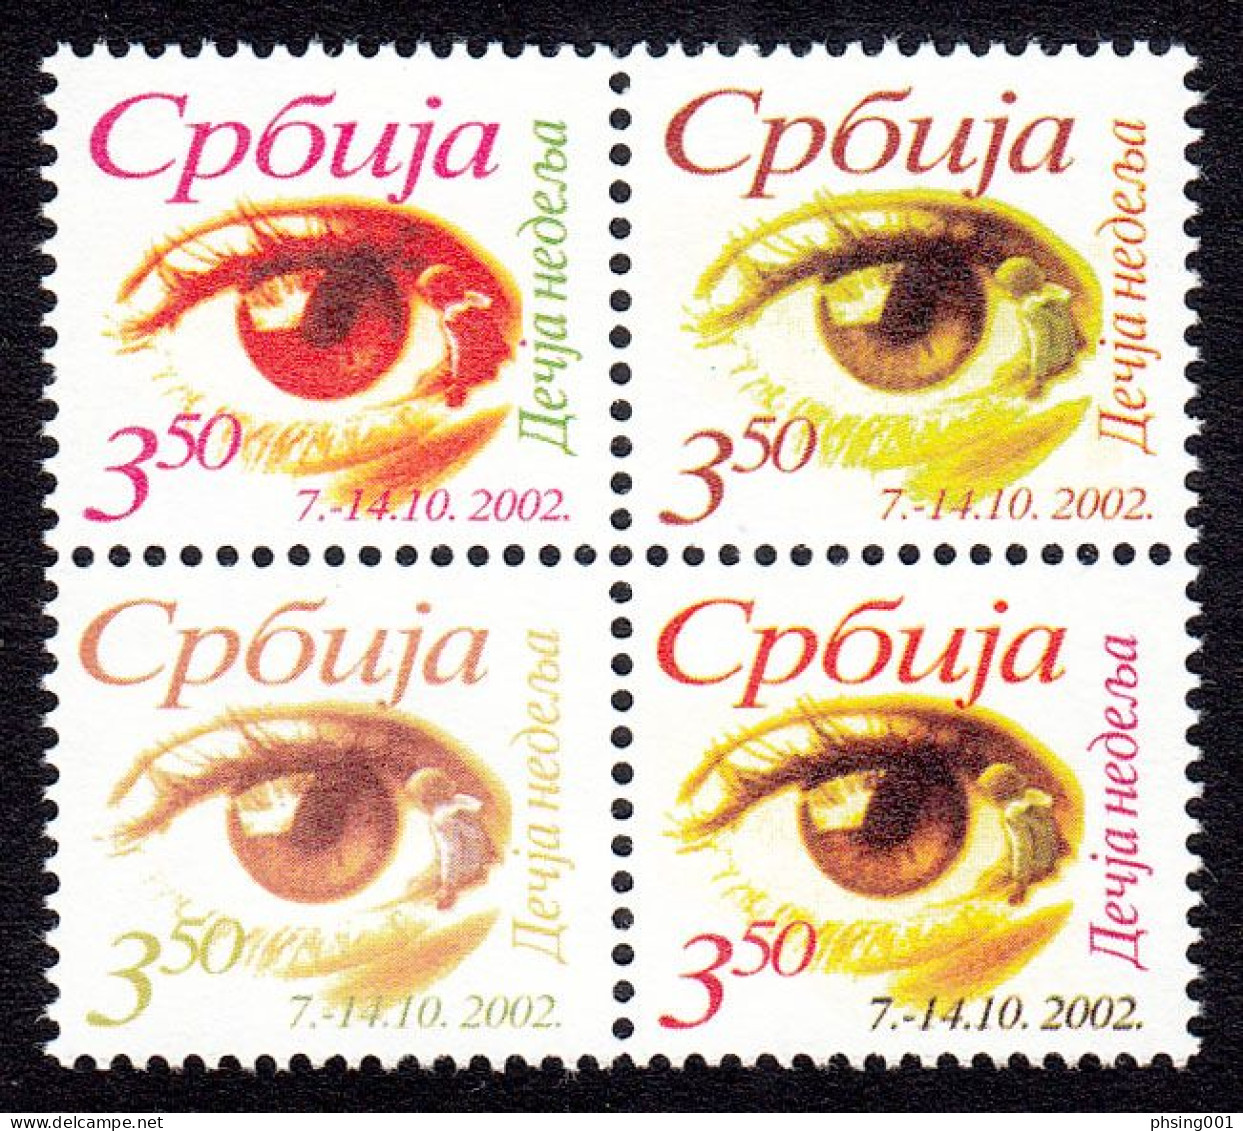 Yugoslavia Serbia 2002 Children's Week Eyes Tax Charity Surcharge, 25, 26, 35 And 36 Position In Sheet In Block Of 4 MNH - Neufs